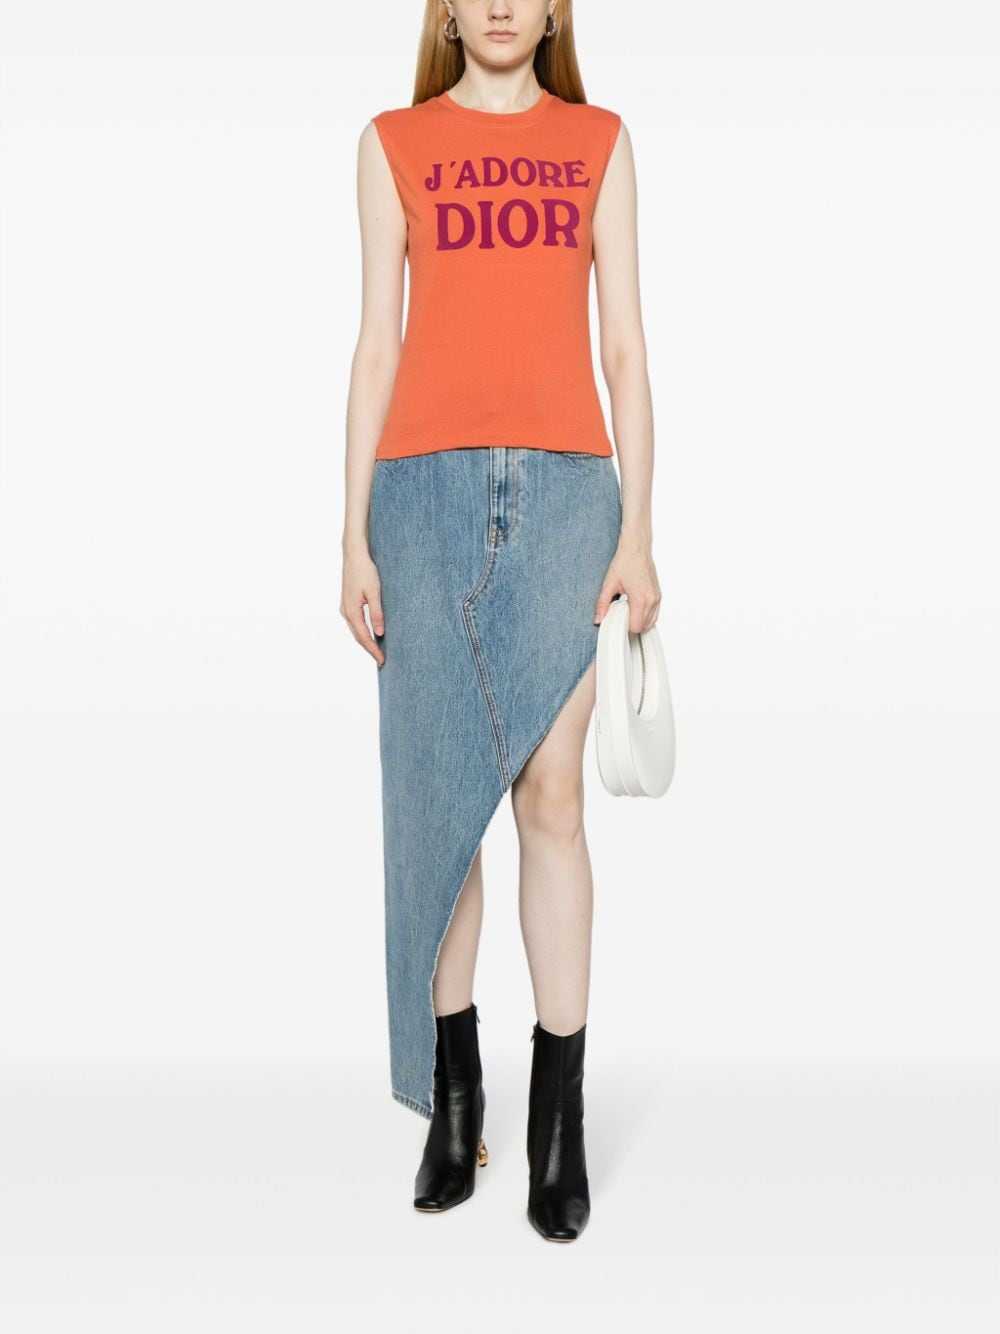 Christian Dior Pre-Owned 2002 slogan-print tank t… - image 3